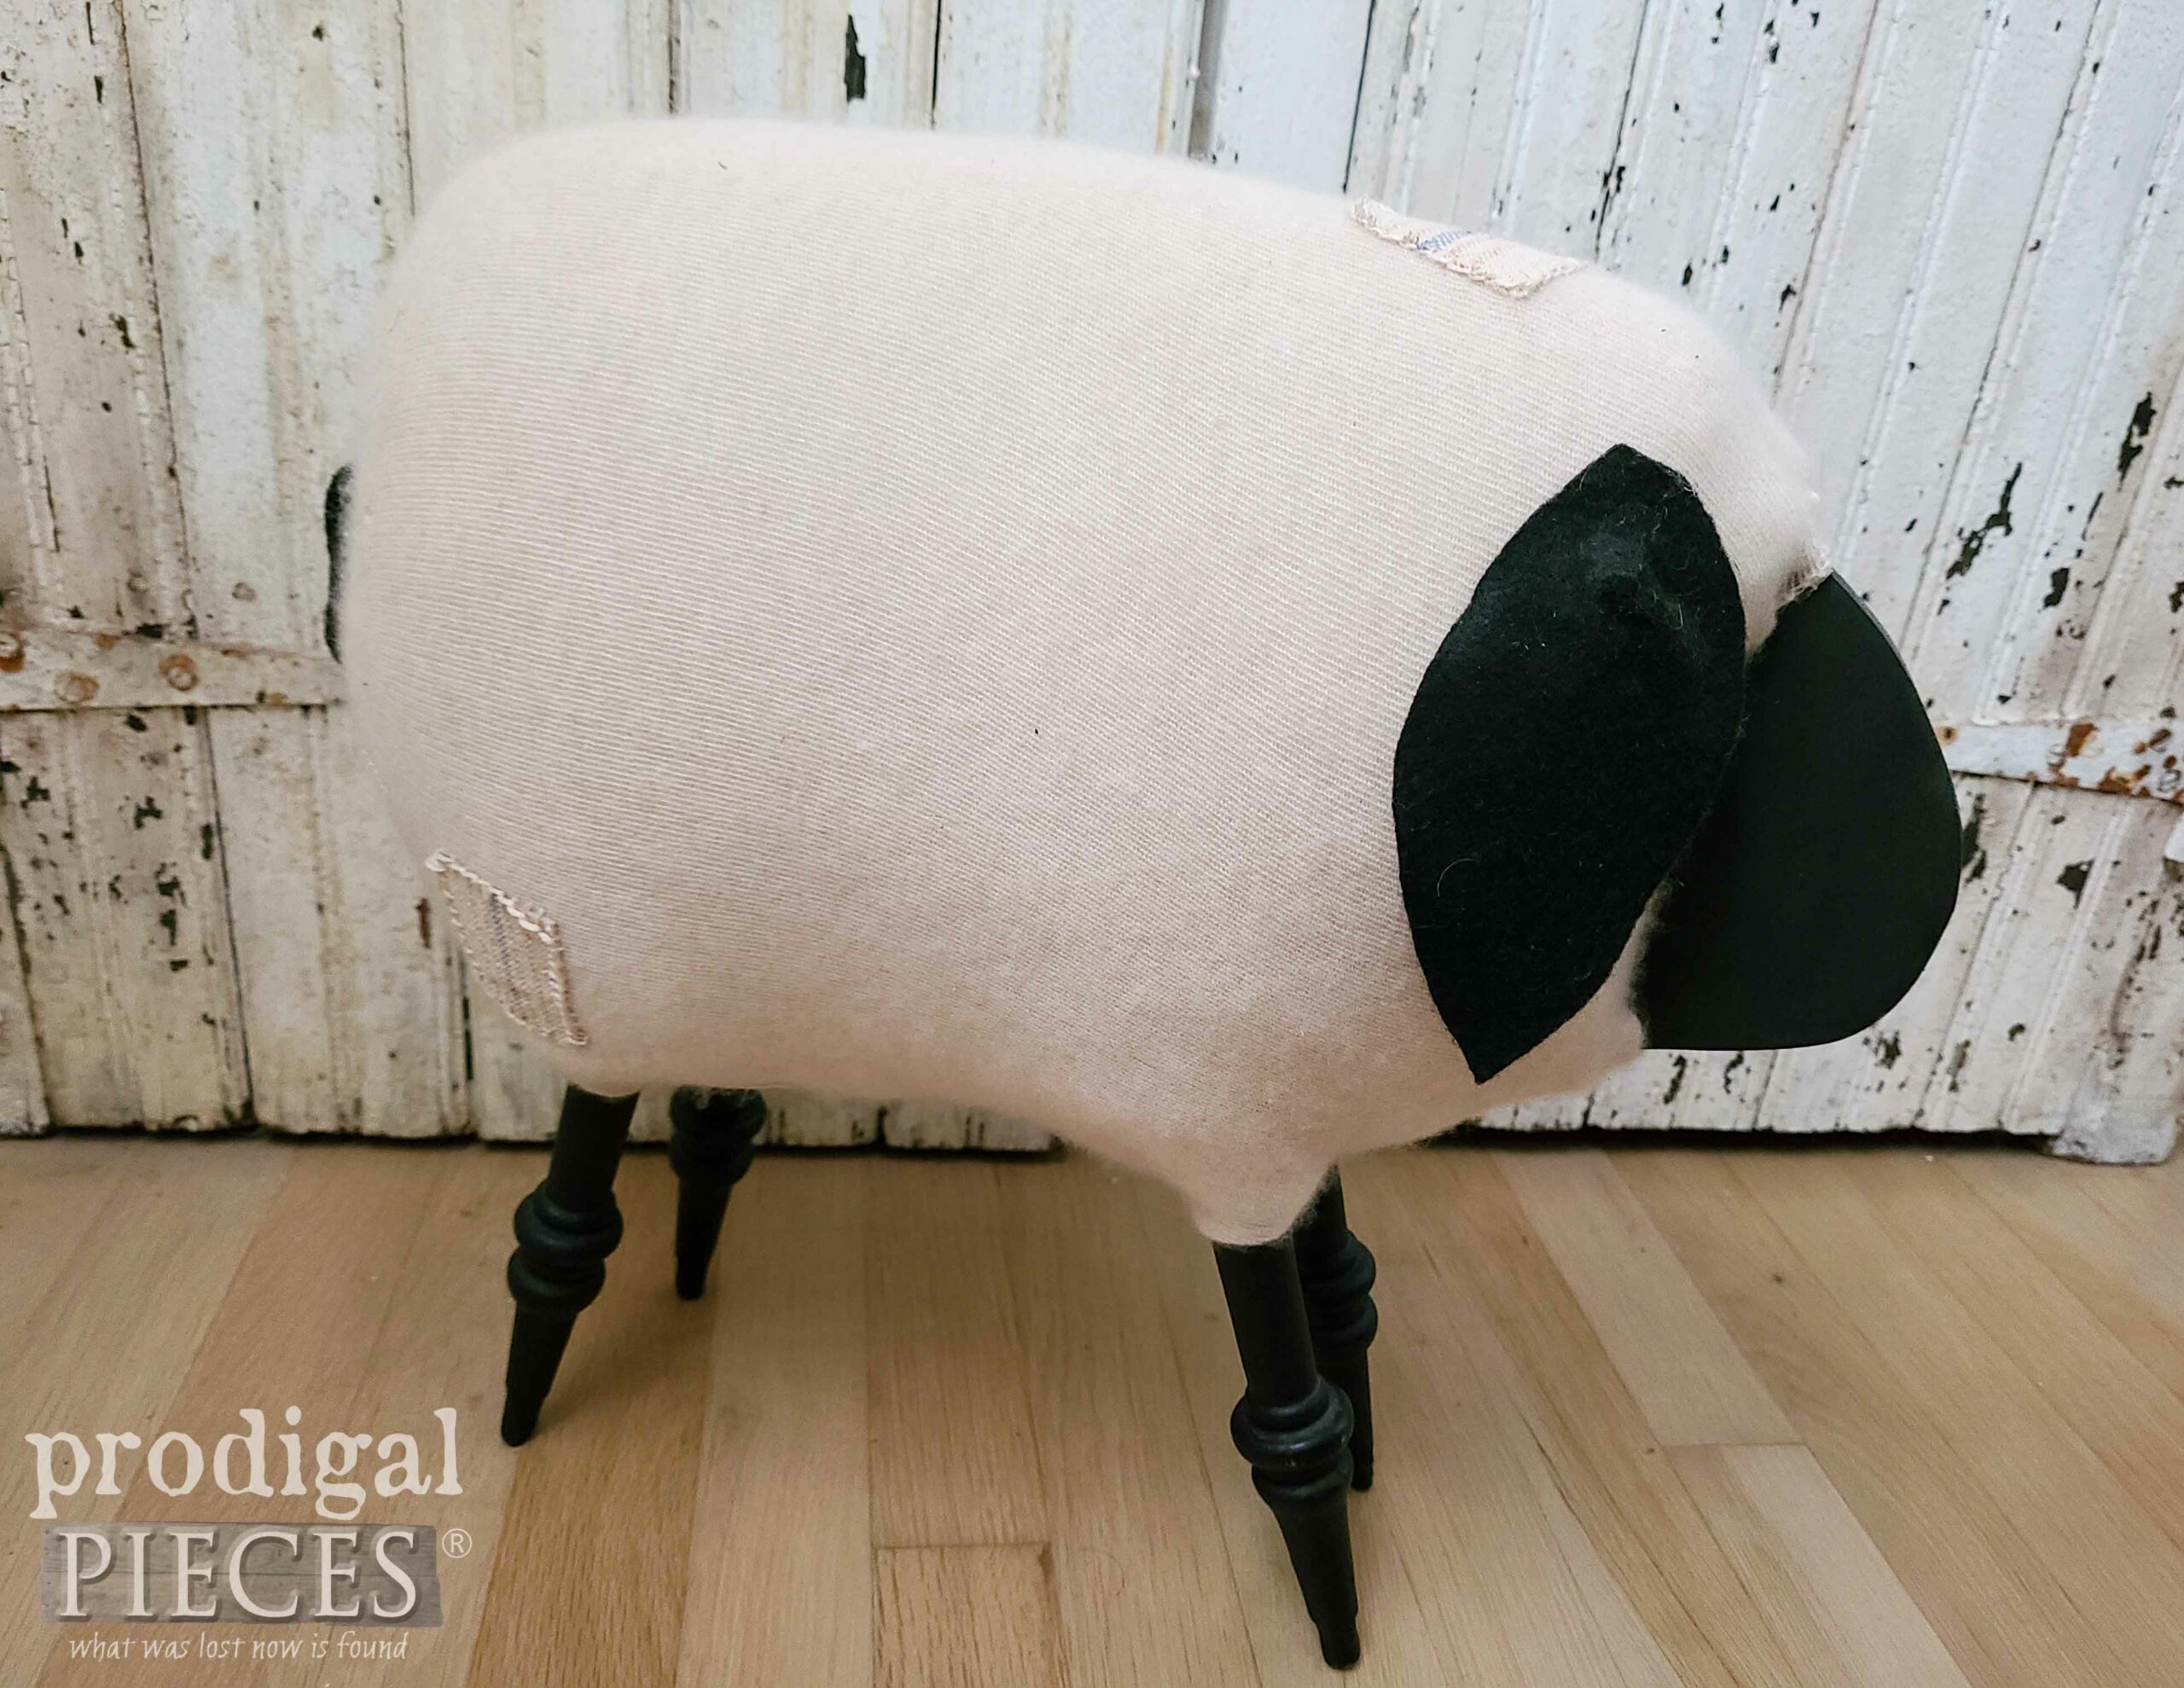 Handmade Woolly Sheep for Farmhouse Decor available at Prodigal Pieces | shop.prodigalpieces.com #prodigalpieces